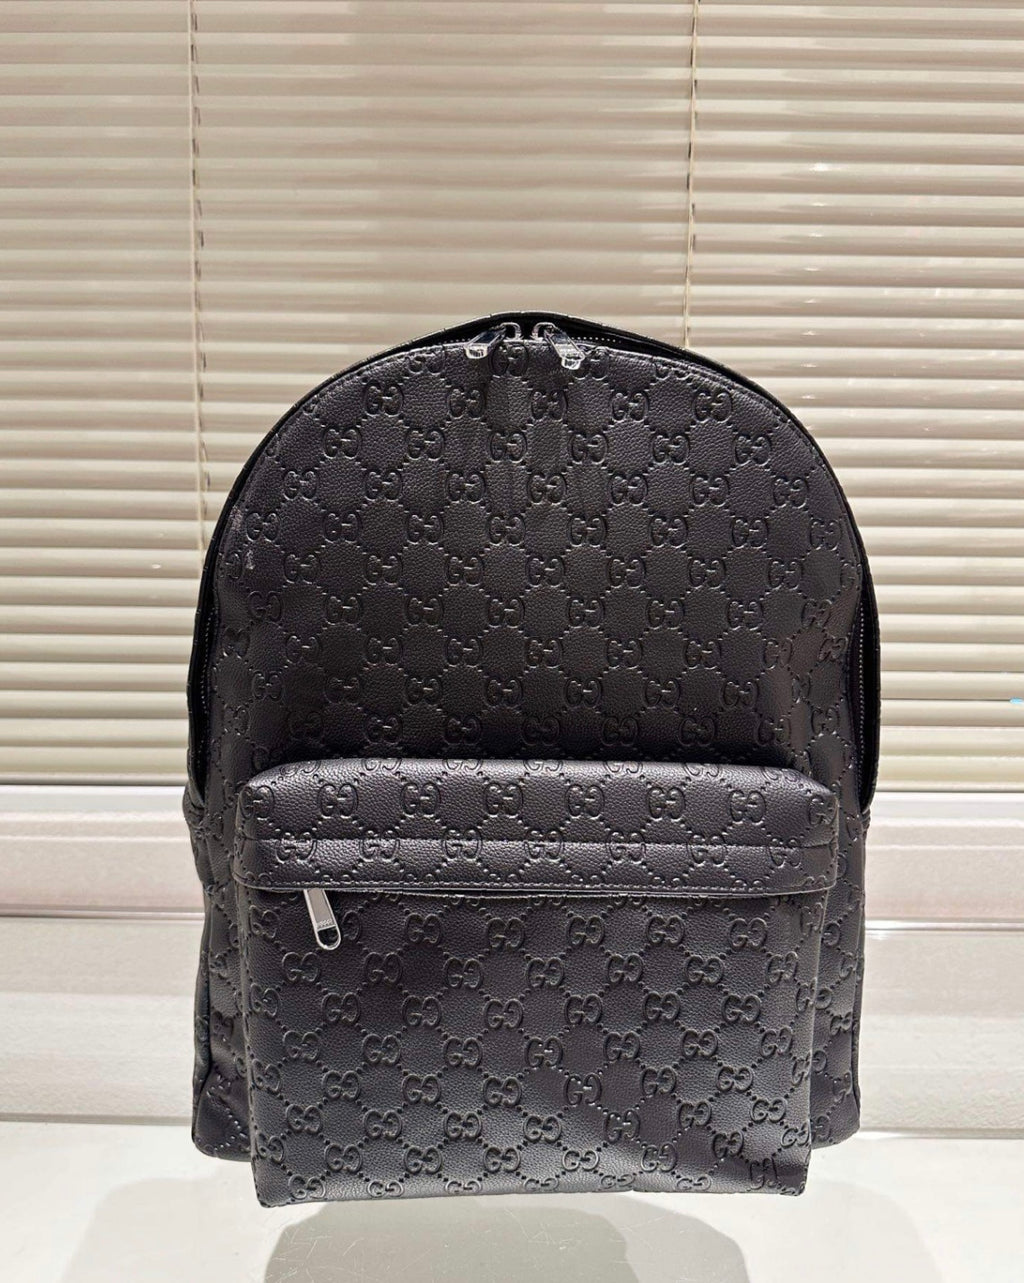 GG backpack (lg)and travel duffle set( Limited)